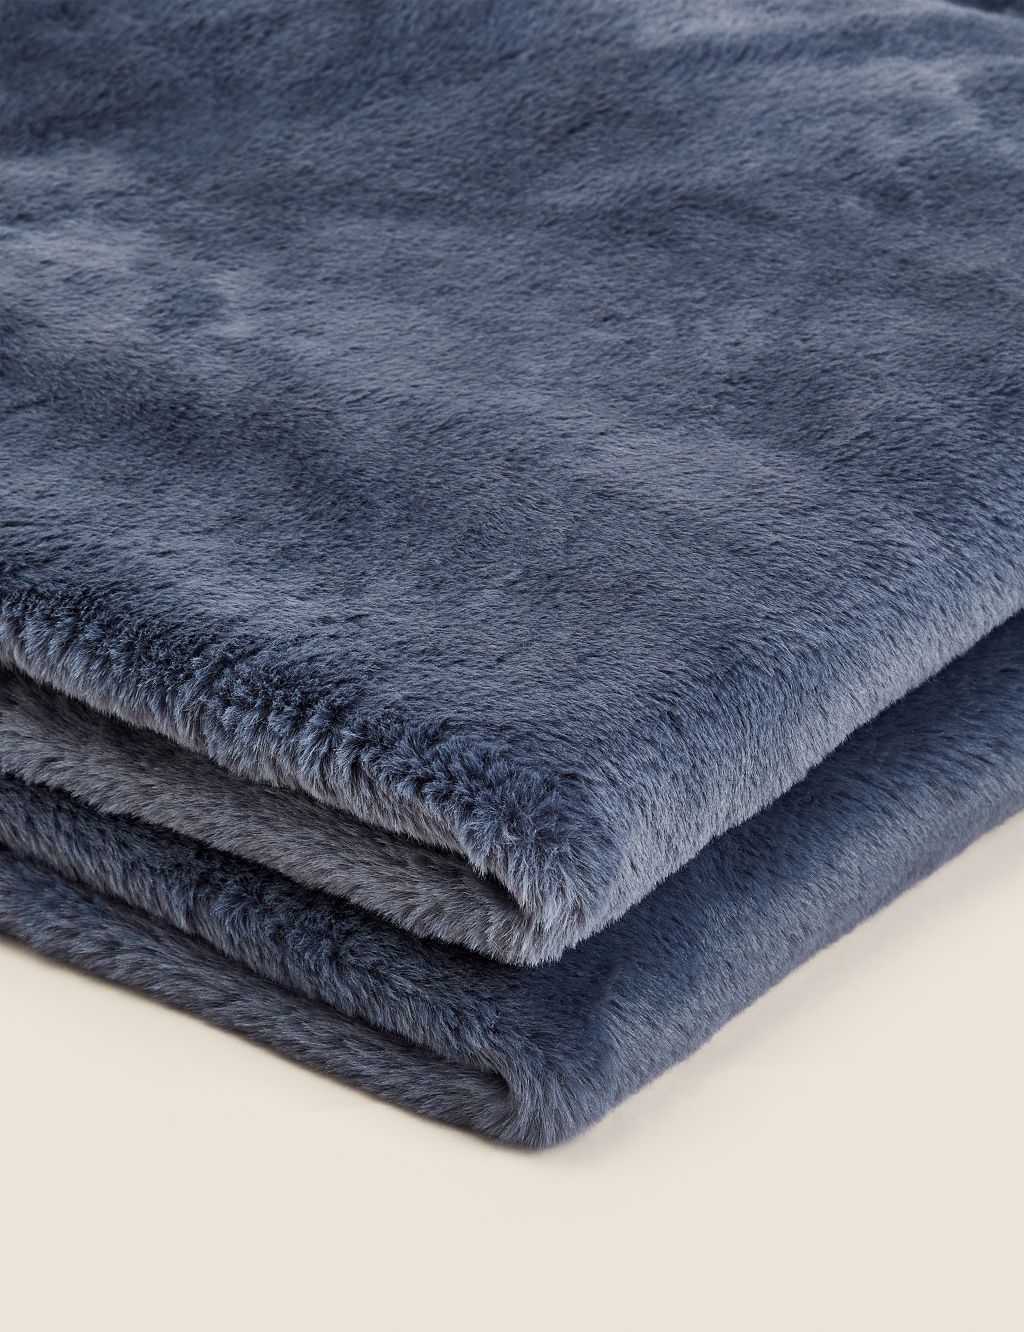 Supersoft Faux Fur Throw image 4